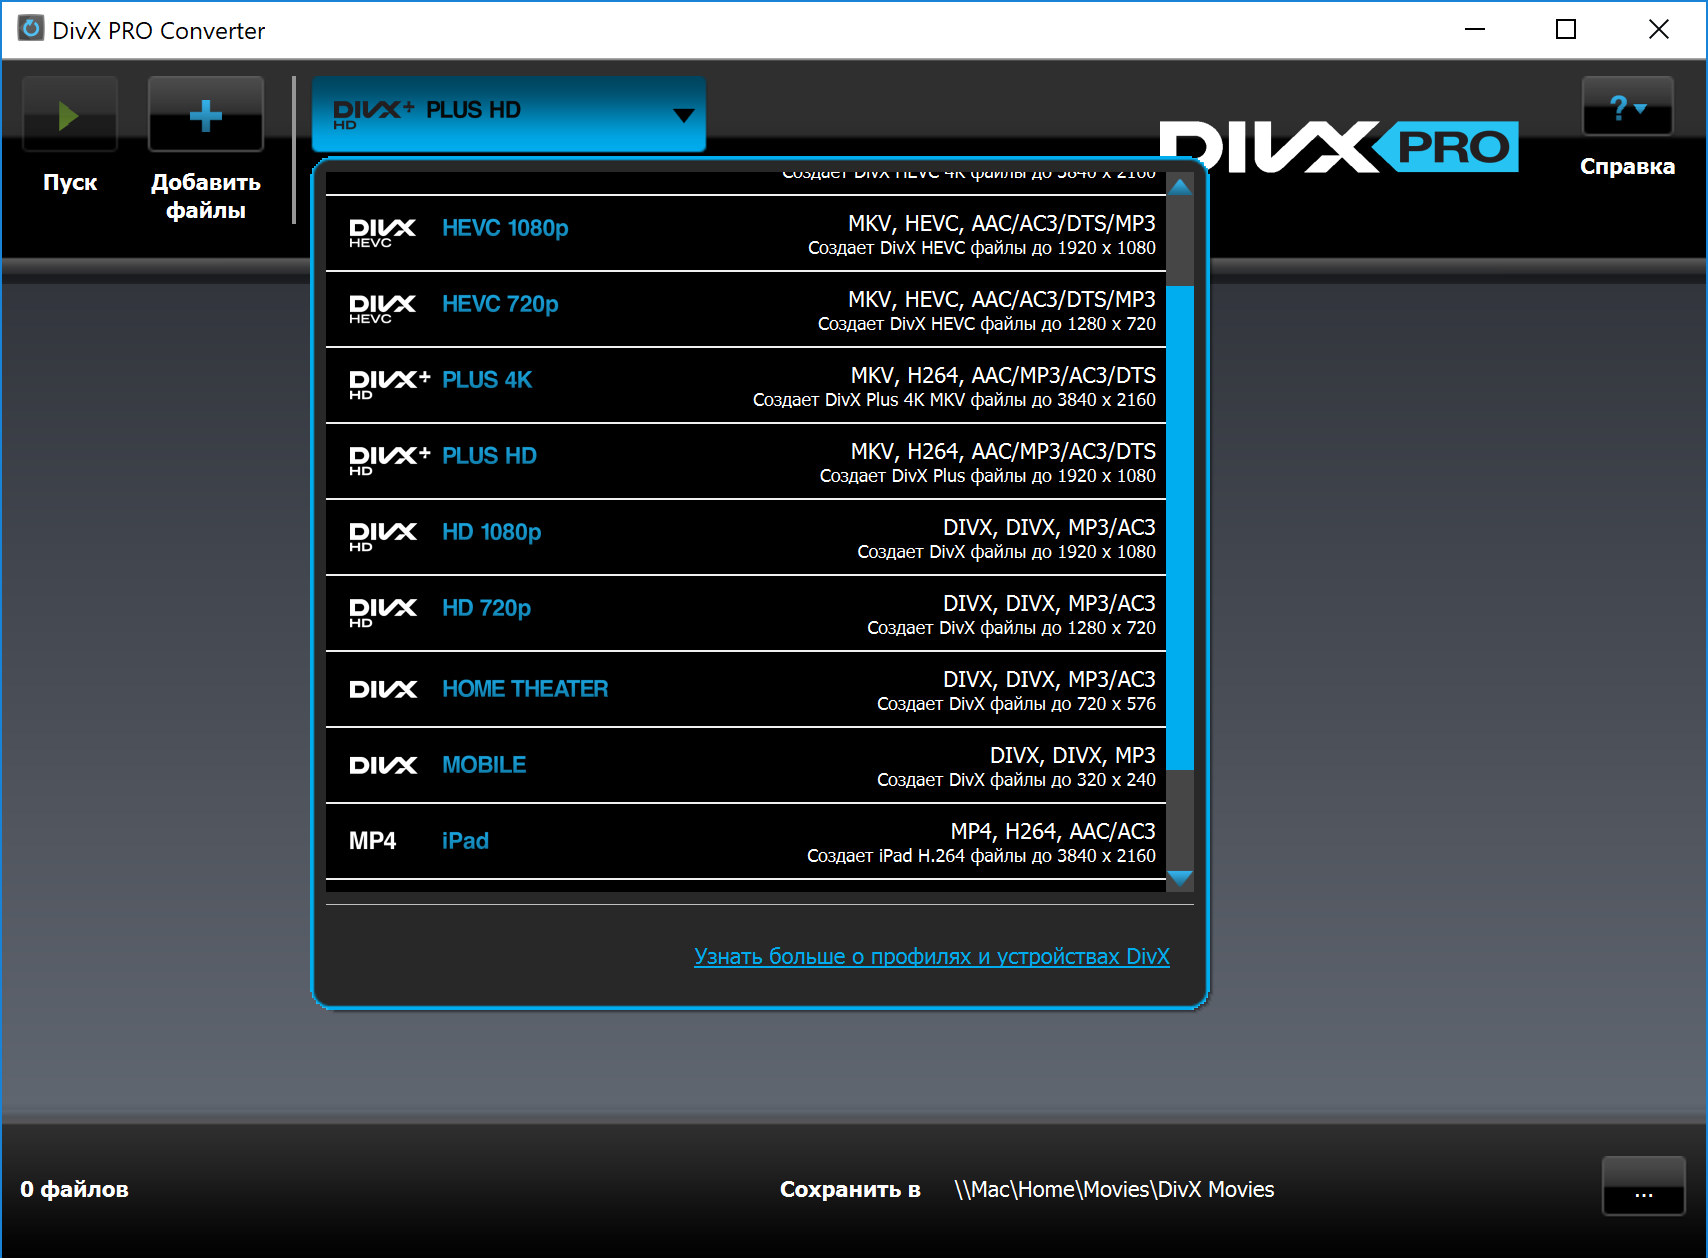 DivX Pro 10.10.0 instal the new version for iphone